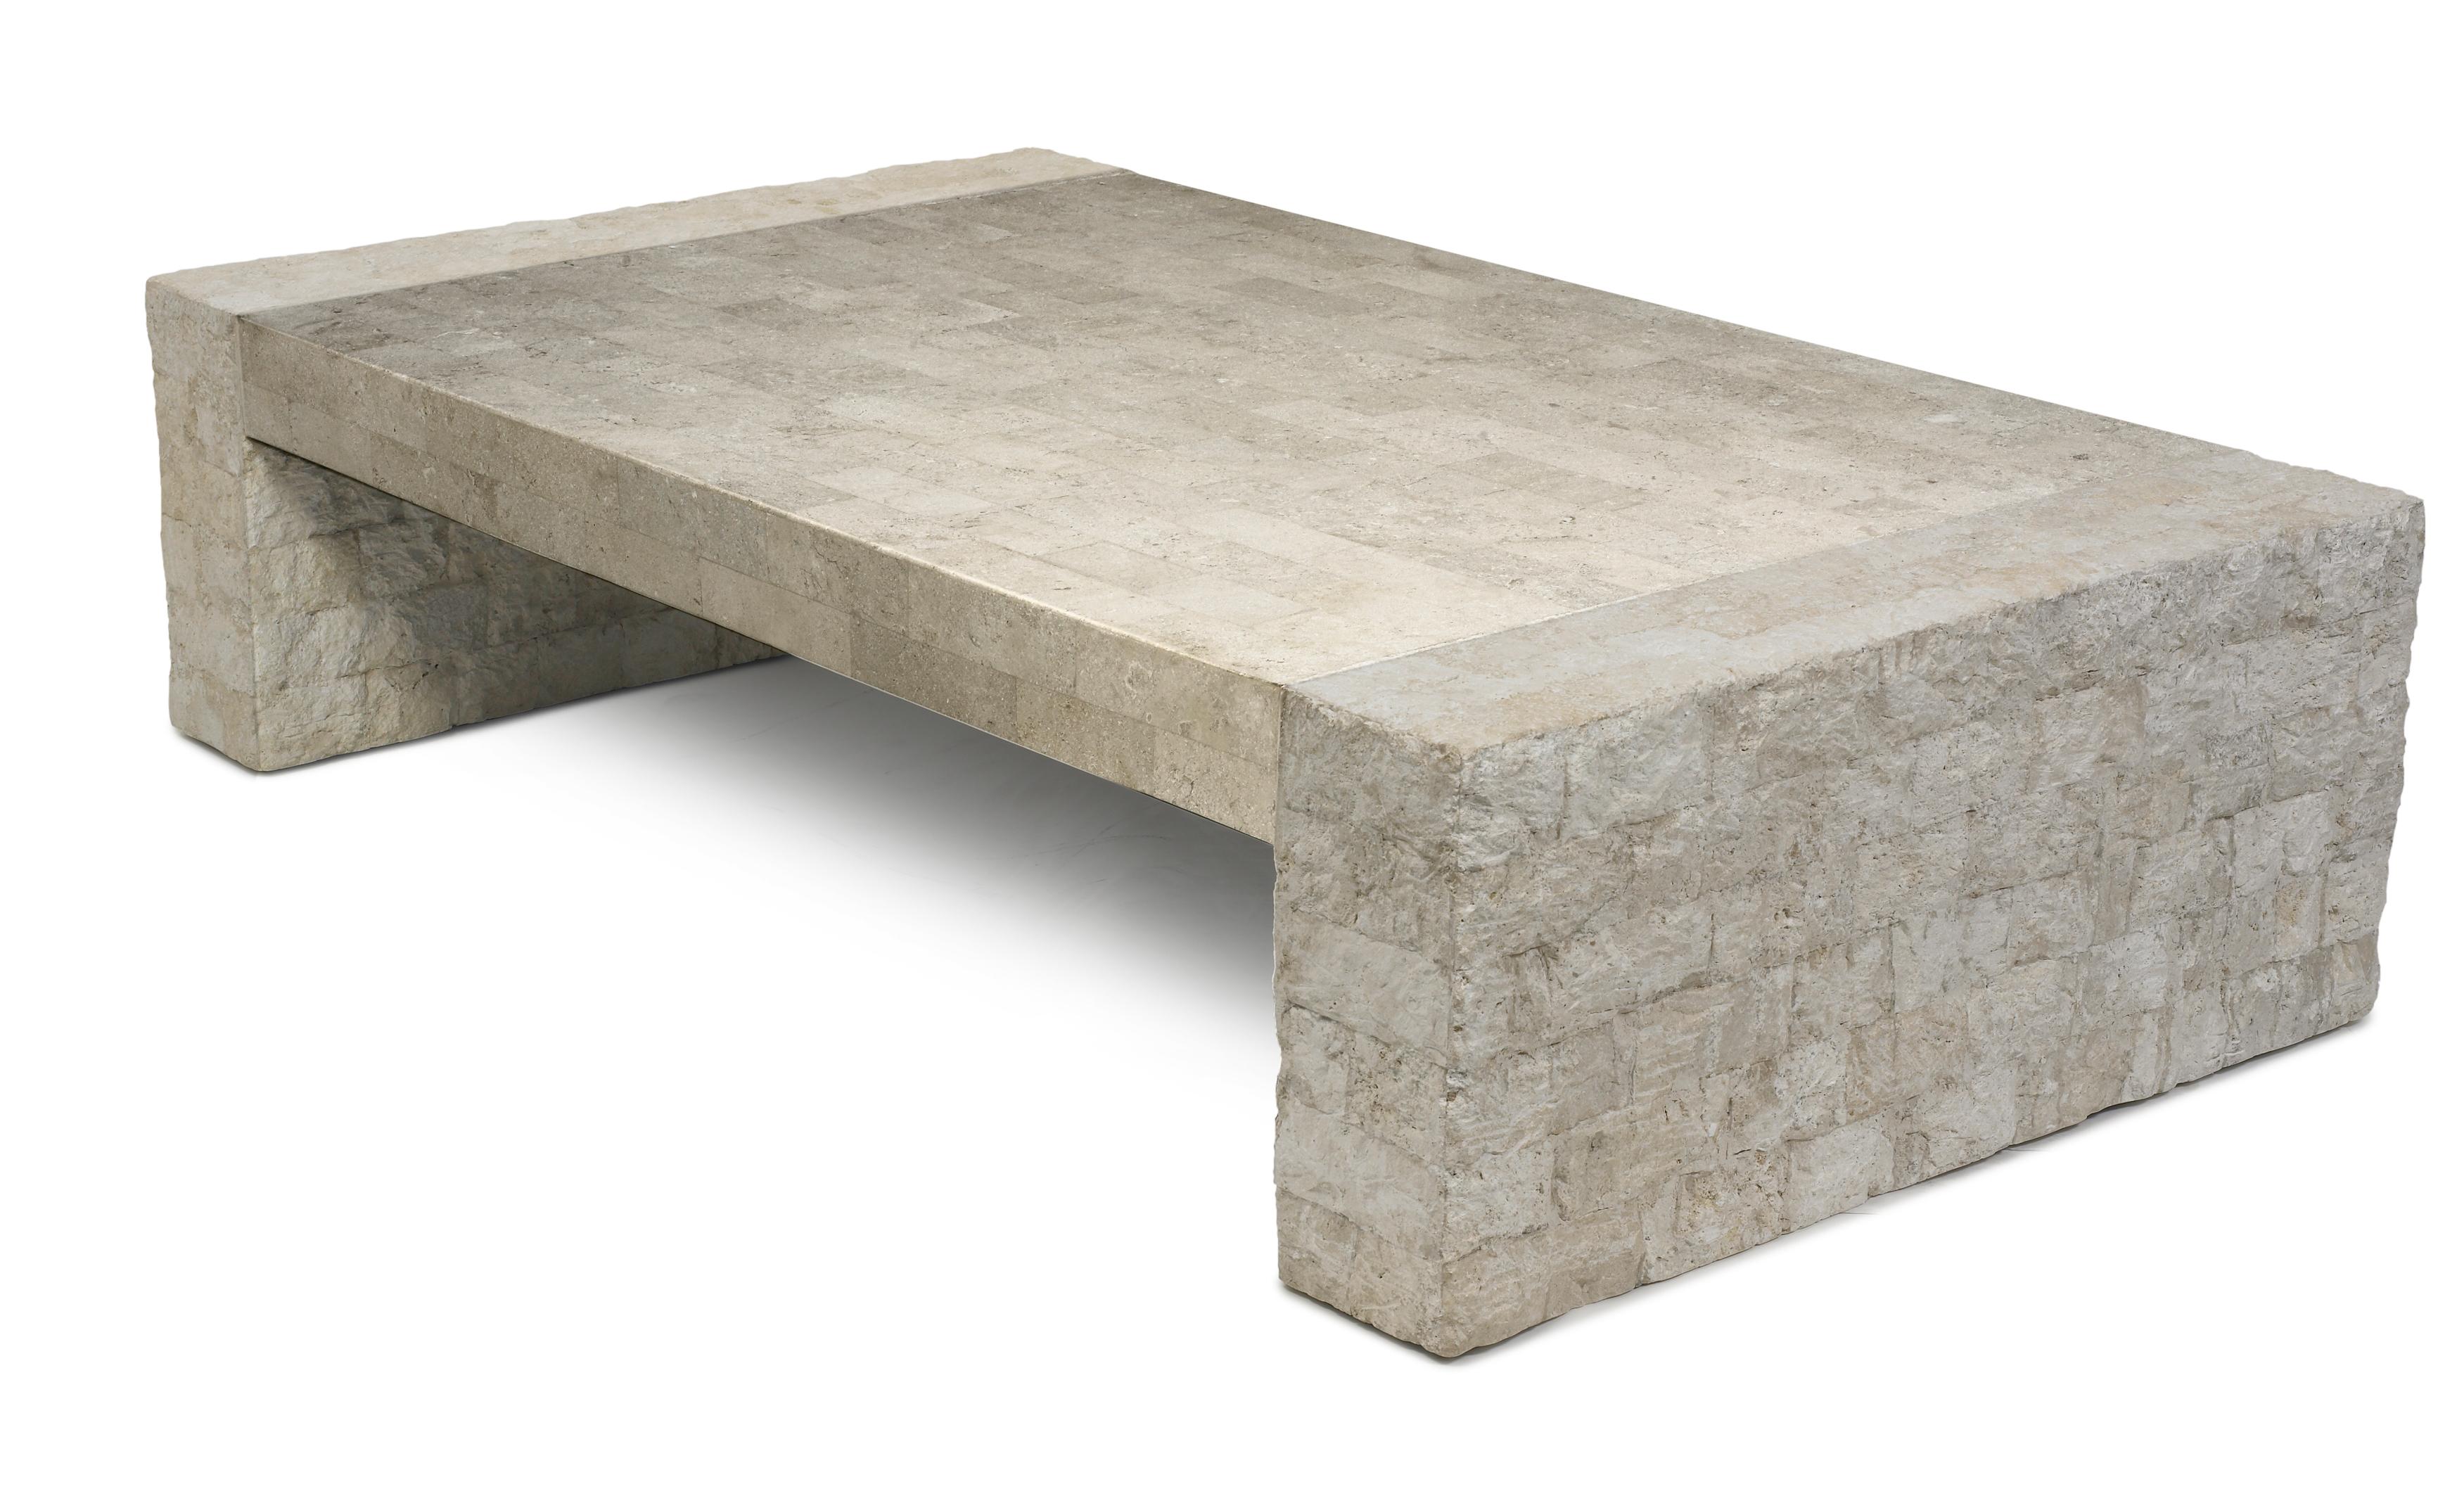 Crafted with a focus on elegant design, clean lines, and captivating materials, the Quincy Cocktail Table caters to those with discerning taste. Made from locally sourced fossilized stone, carefully harvested in the Philippines, this table